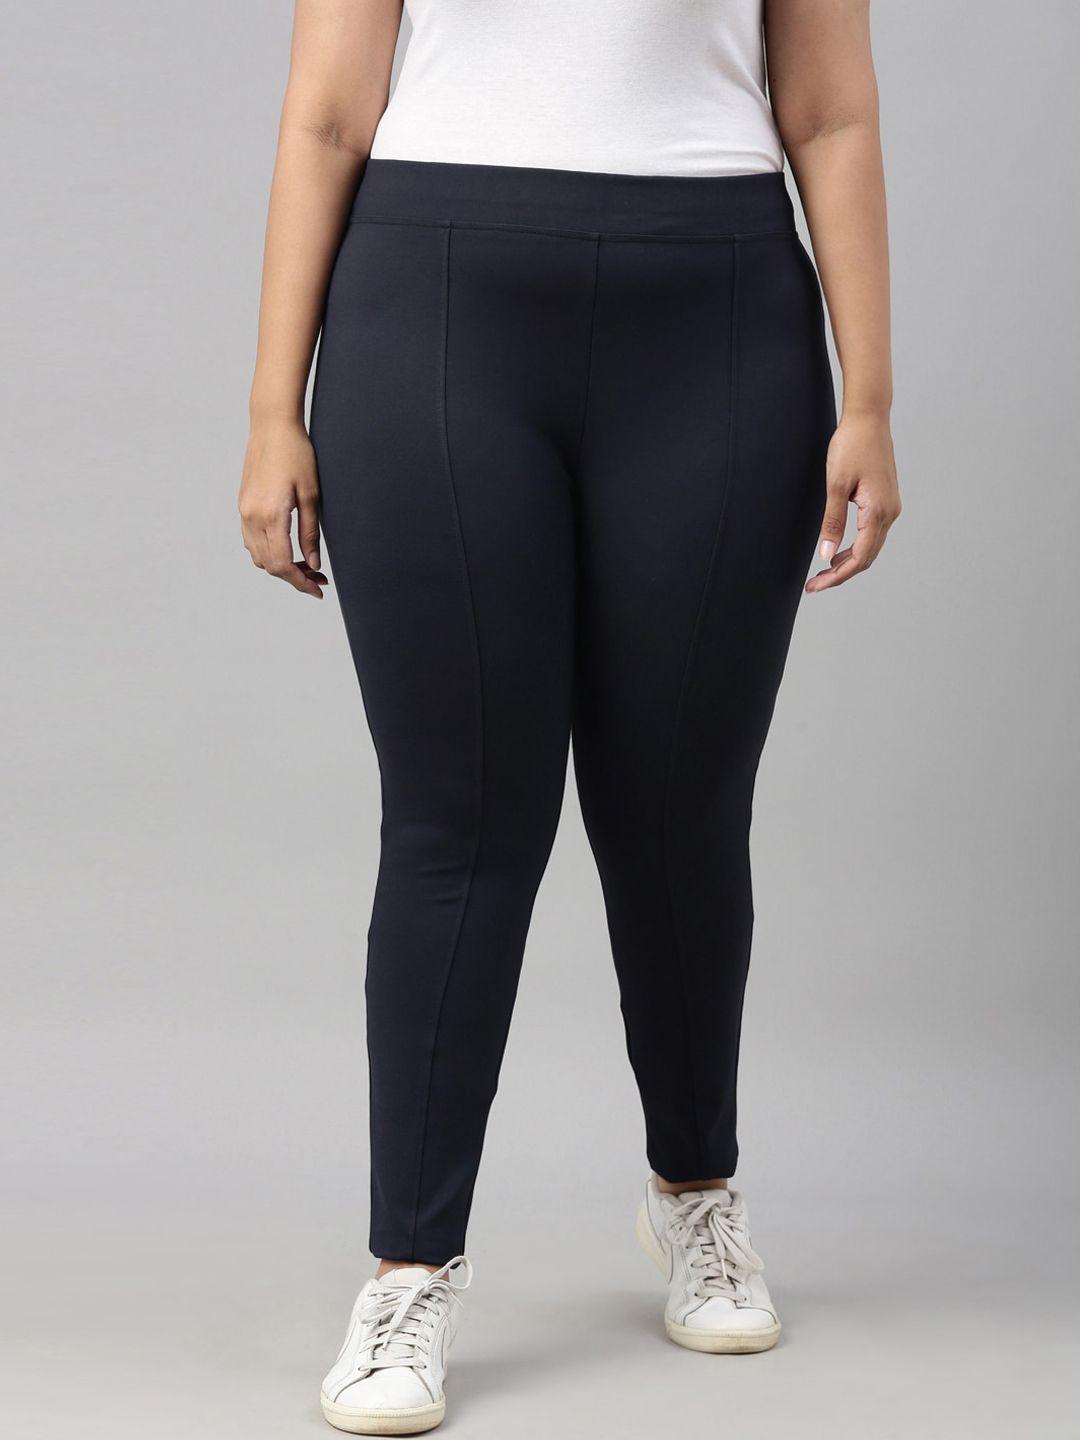 the-pink-moon-women-navy-blue-high-rise-wrinkle-free-trousers